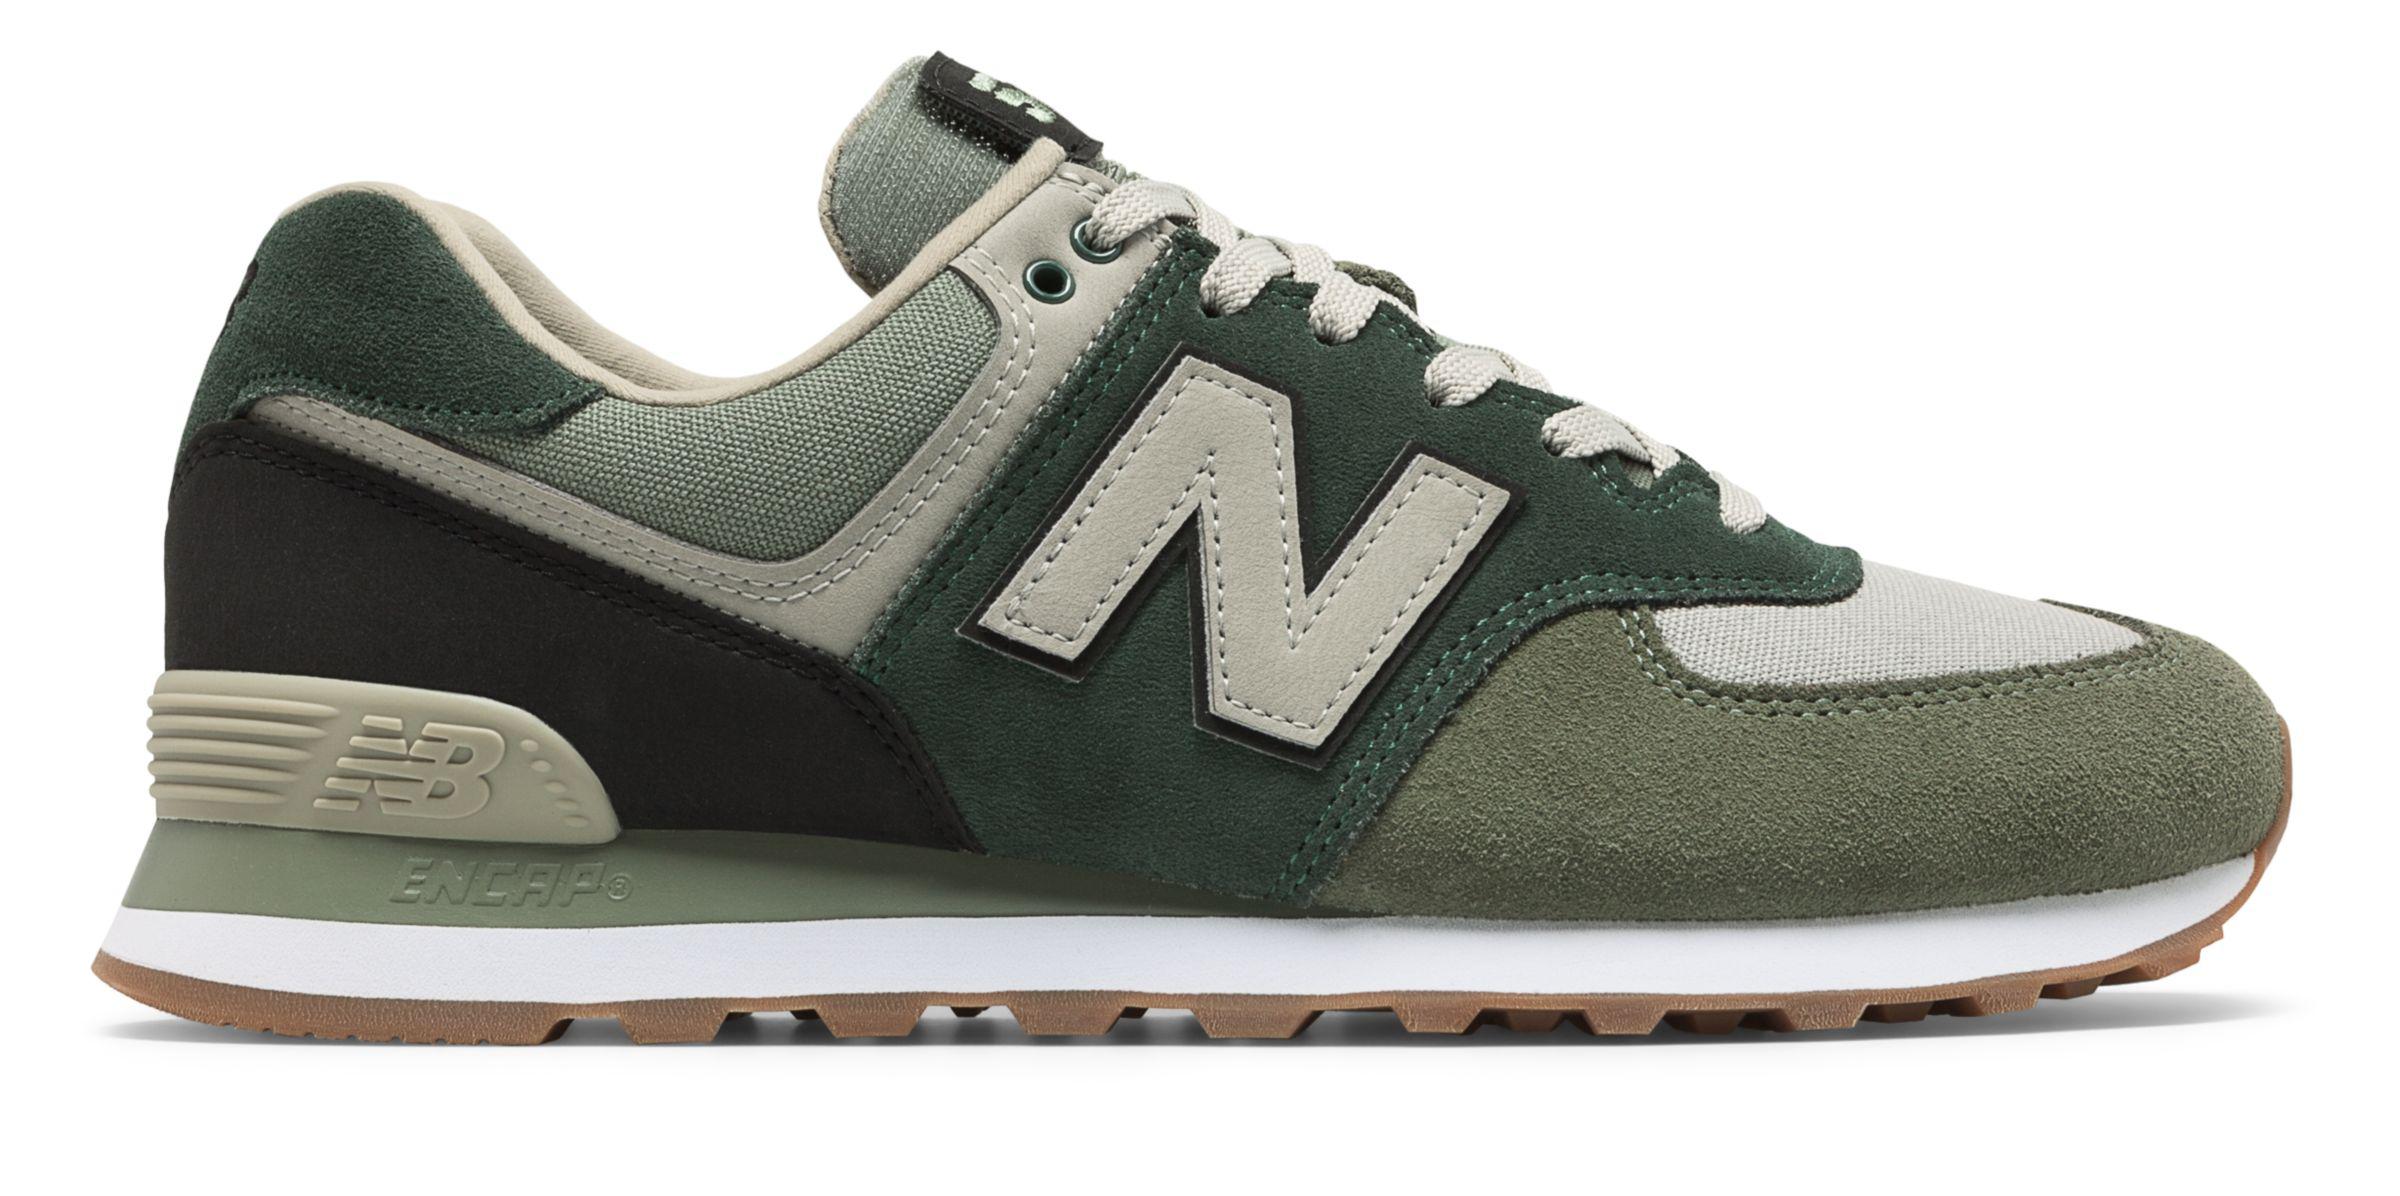 New Balance Suede 574 Military Patch in 